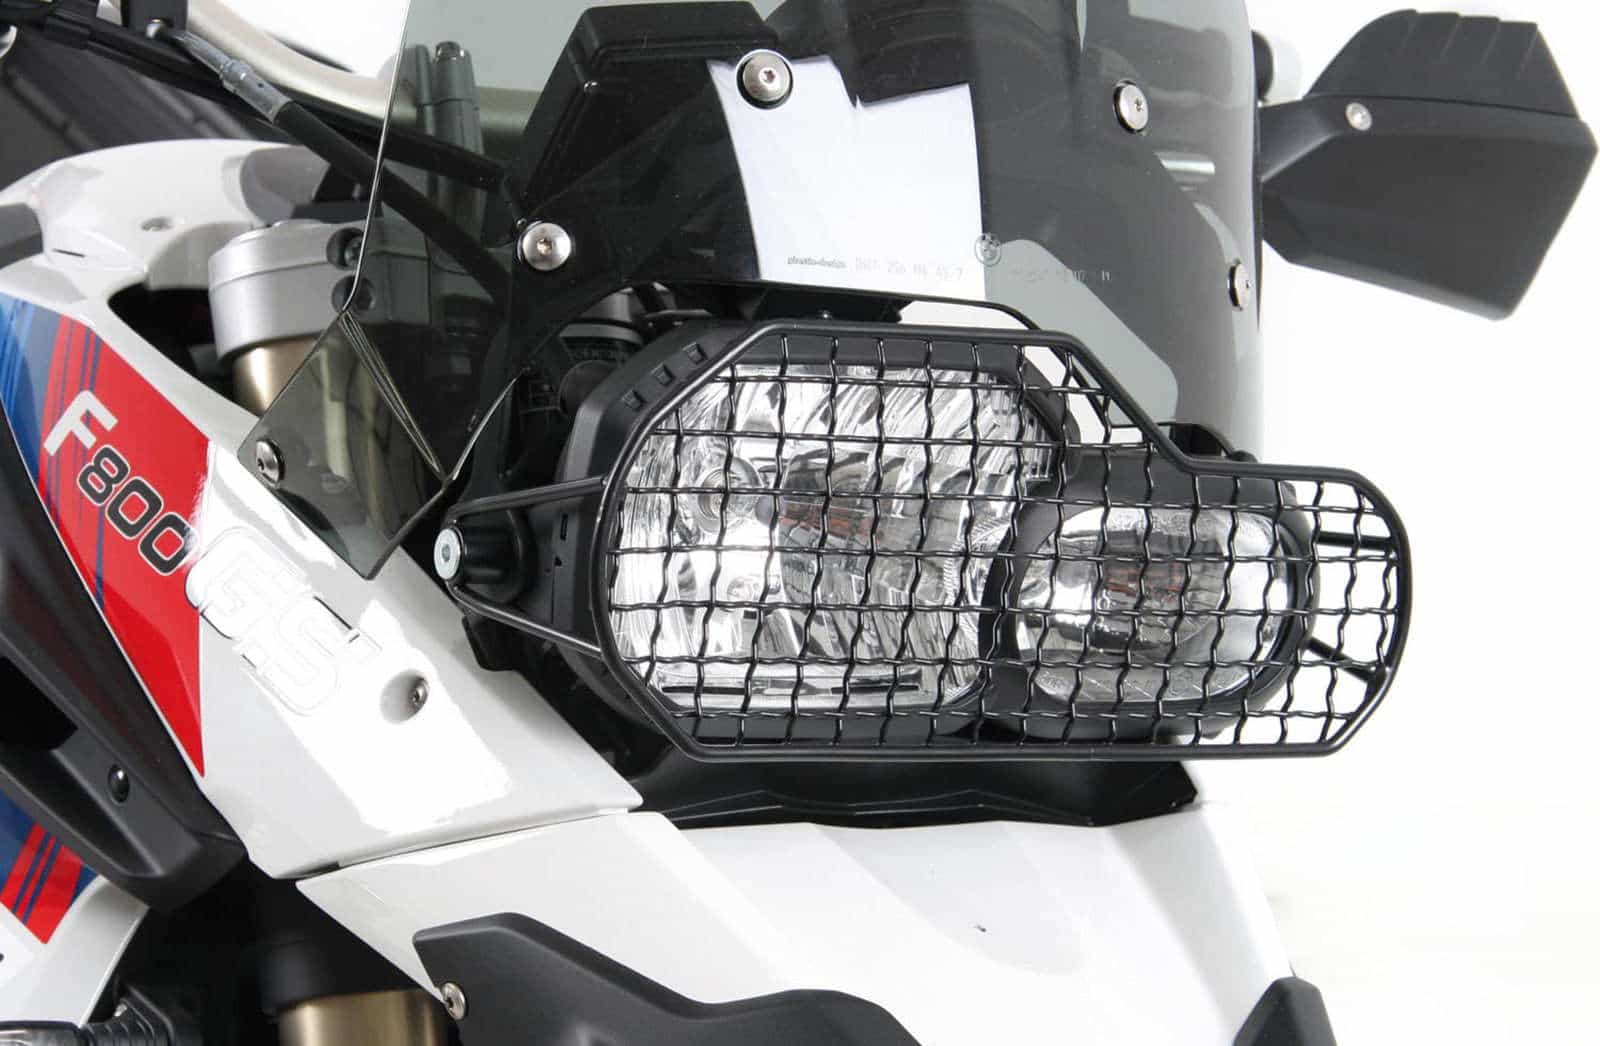 Headlight grill for BMW F 650 GS Twin (2008-2011)/F 700 GS (2012-2017)